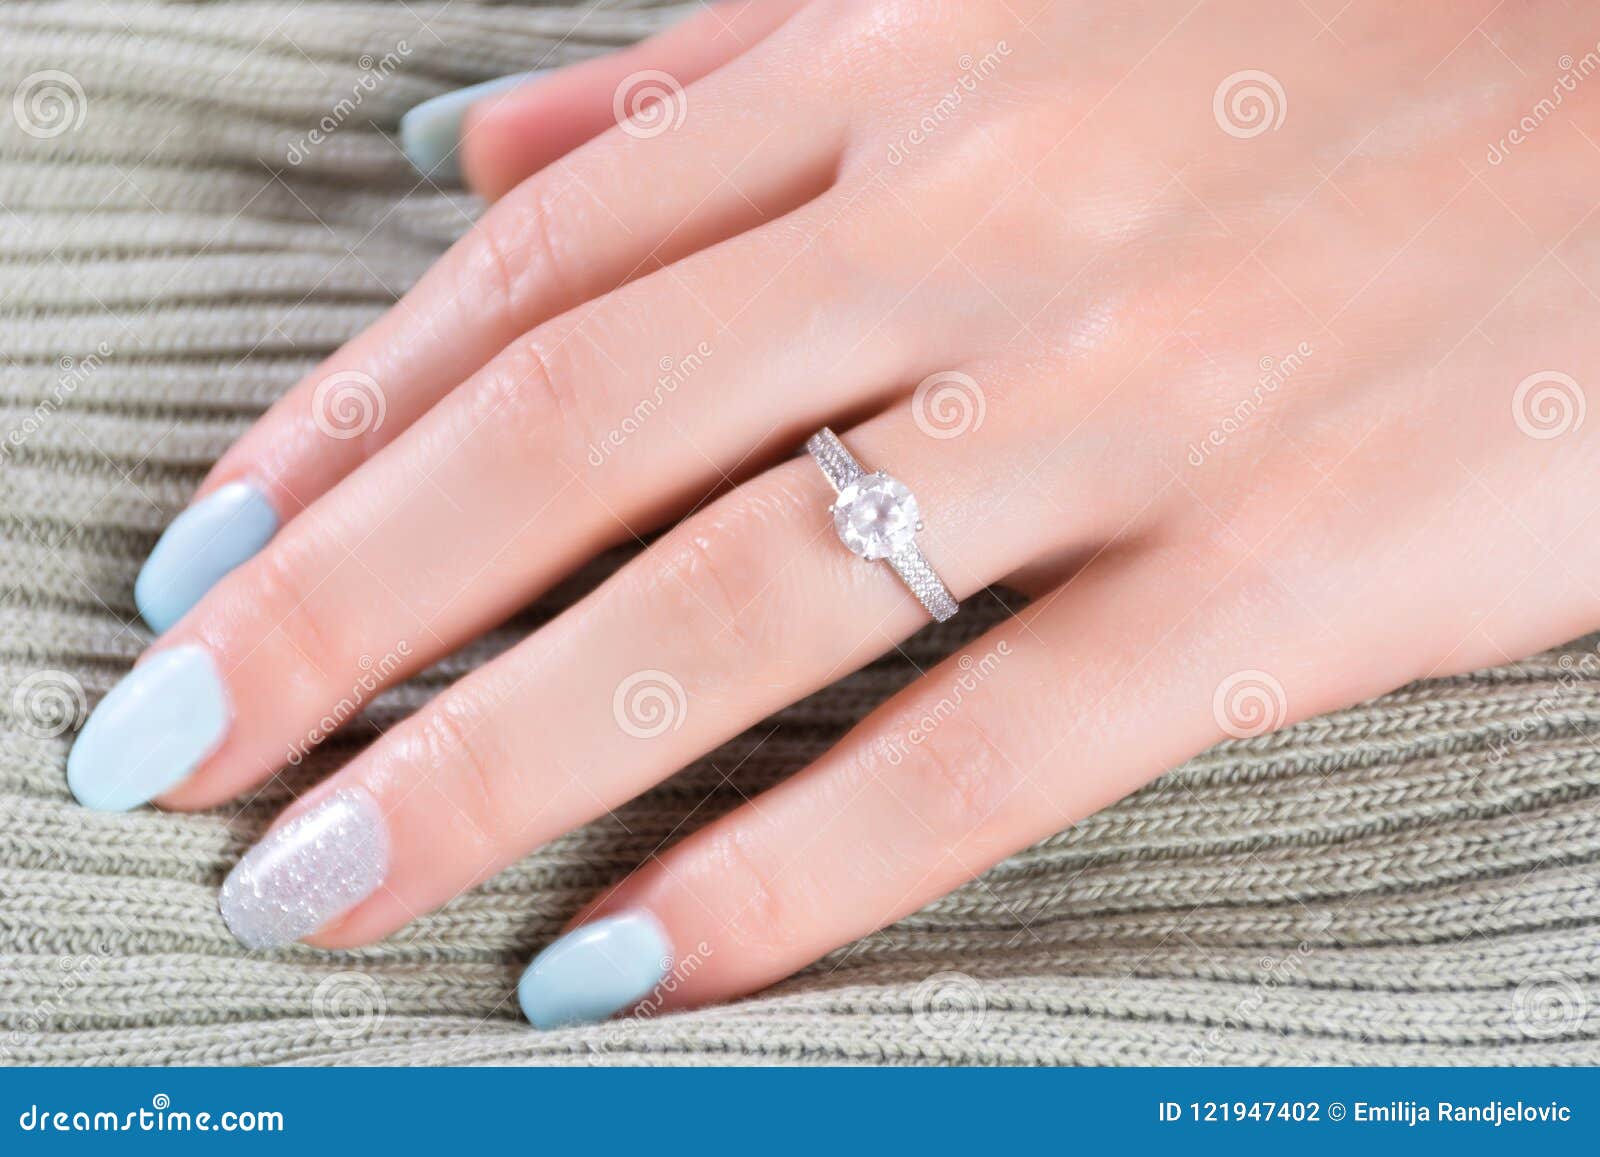 Ring Fingers and Their Meanings: Where Should You Wear Your Ring